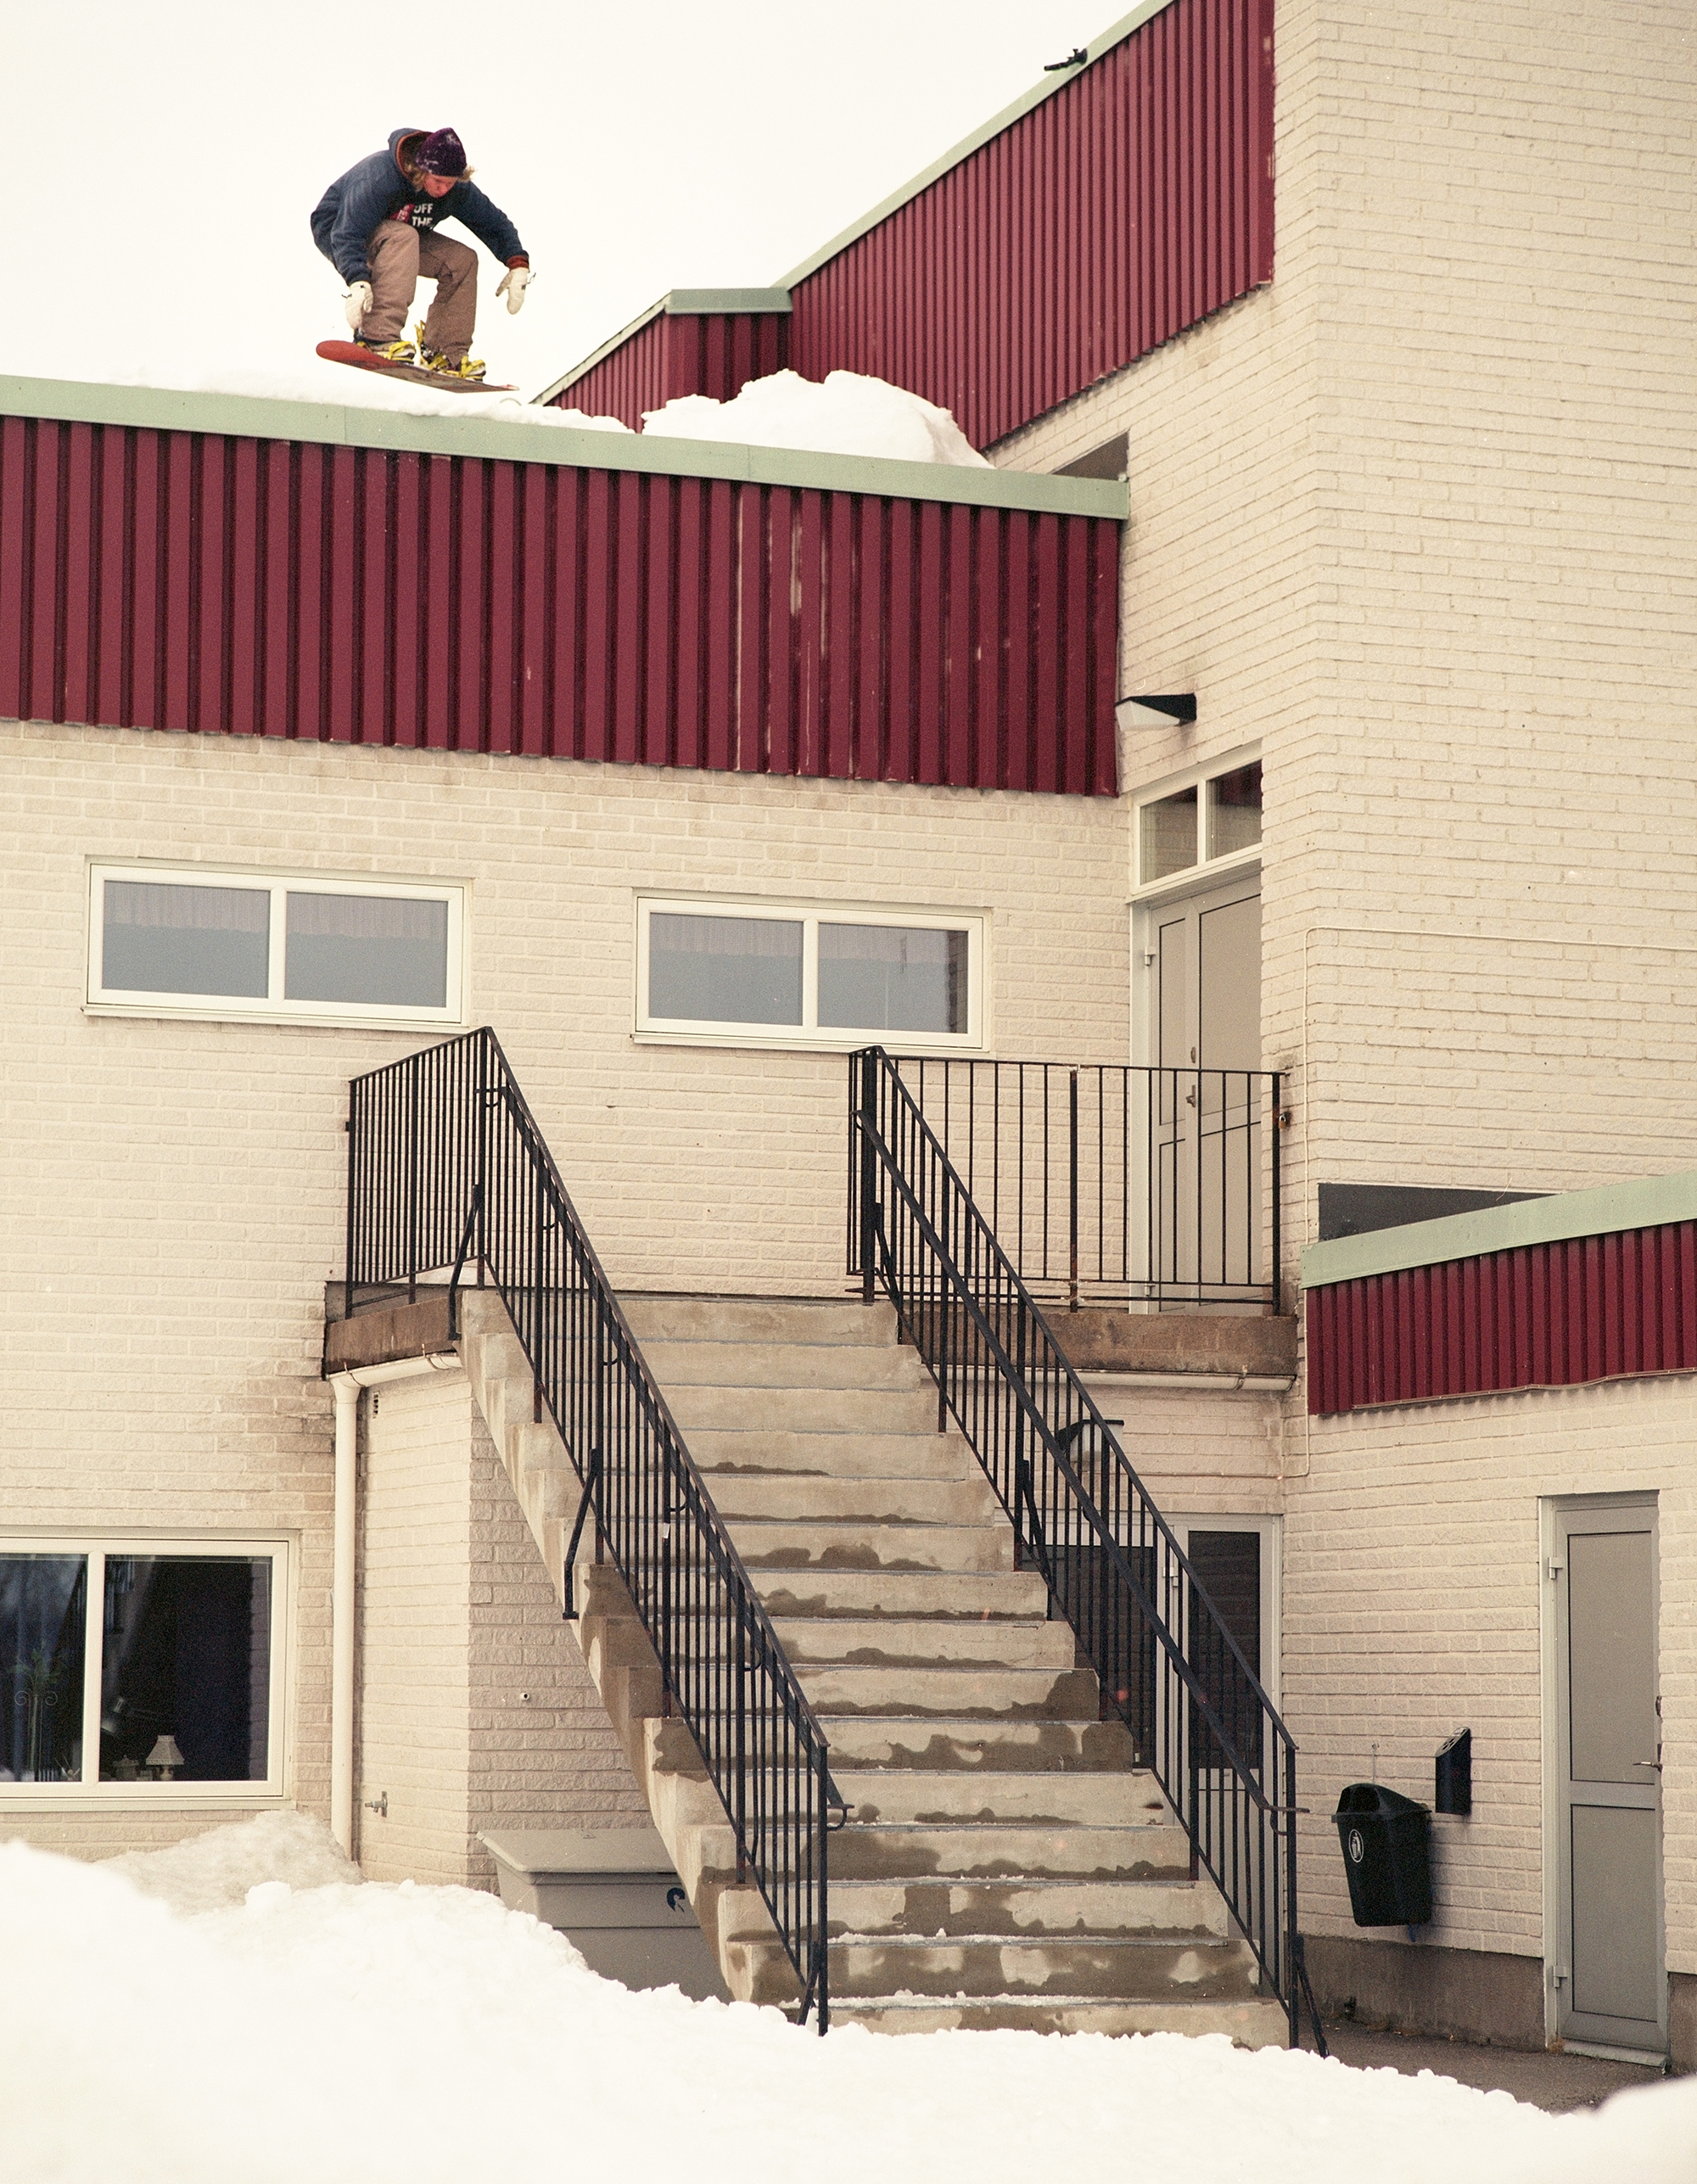 F5_160vc_073_Cees_Wille_suicidal_roof_drop_to_boardslide_HD.jpg